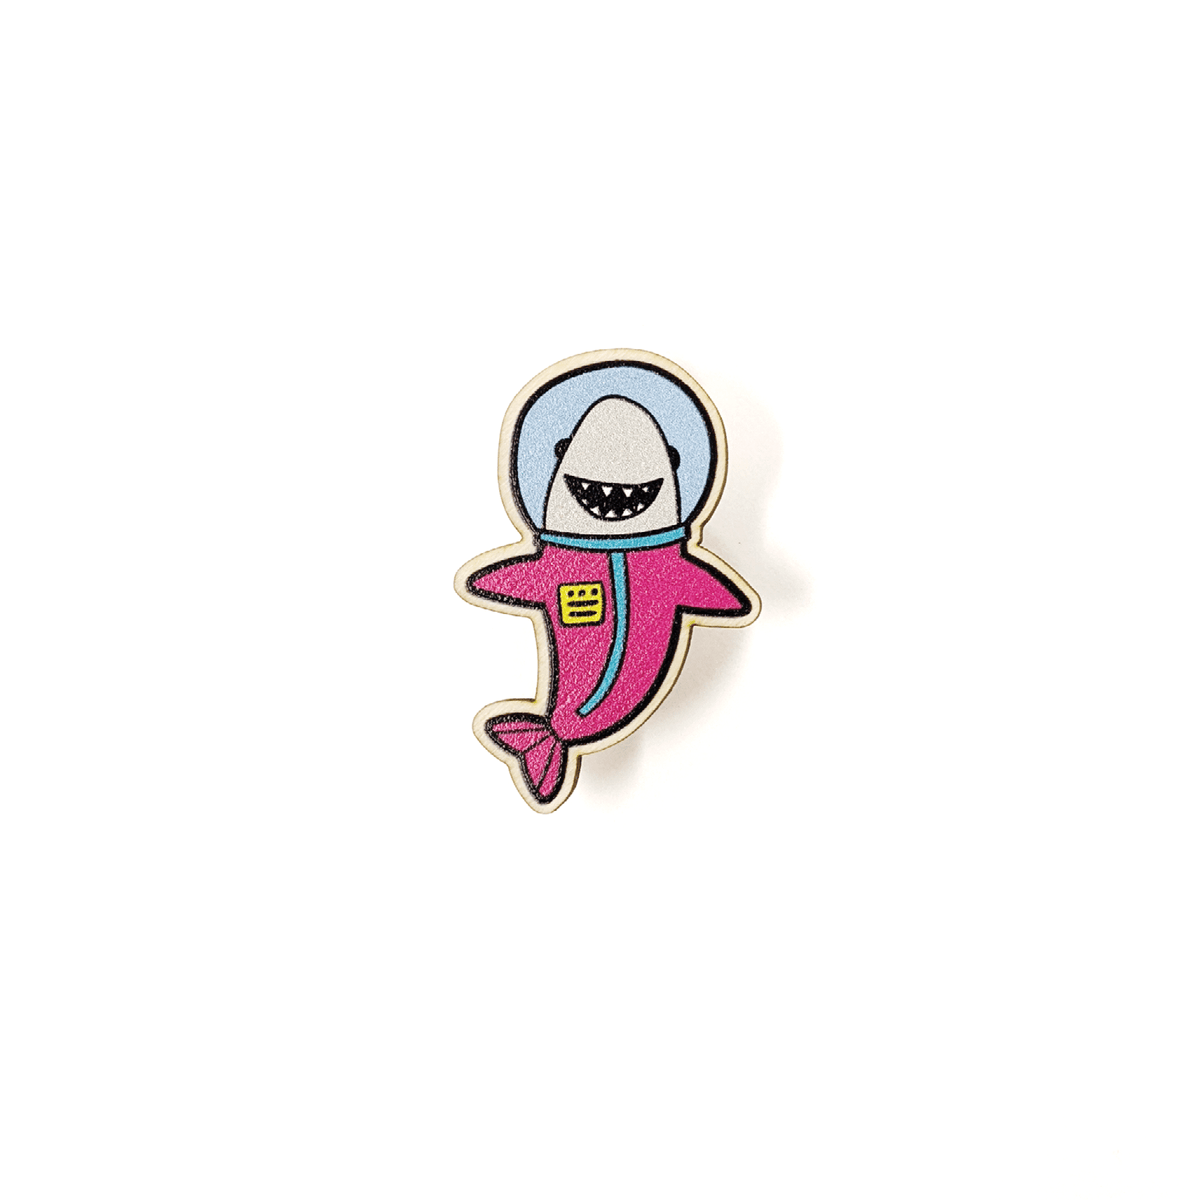 Space Shark Wooden Pin by Anna Alekseeva - Whale and Bird